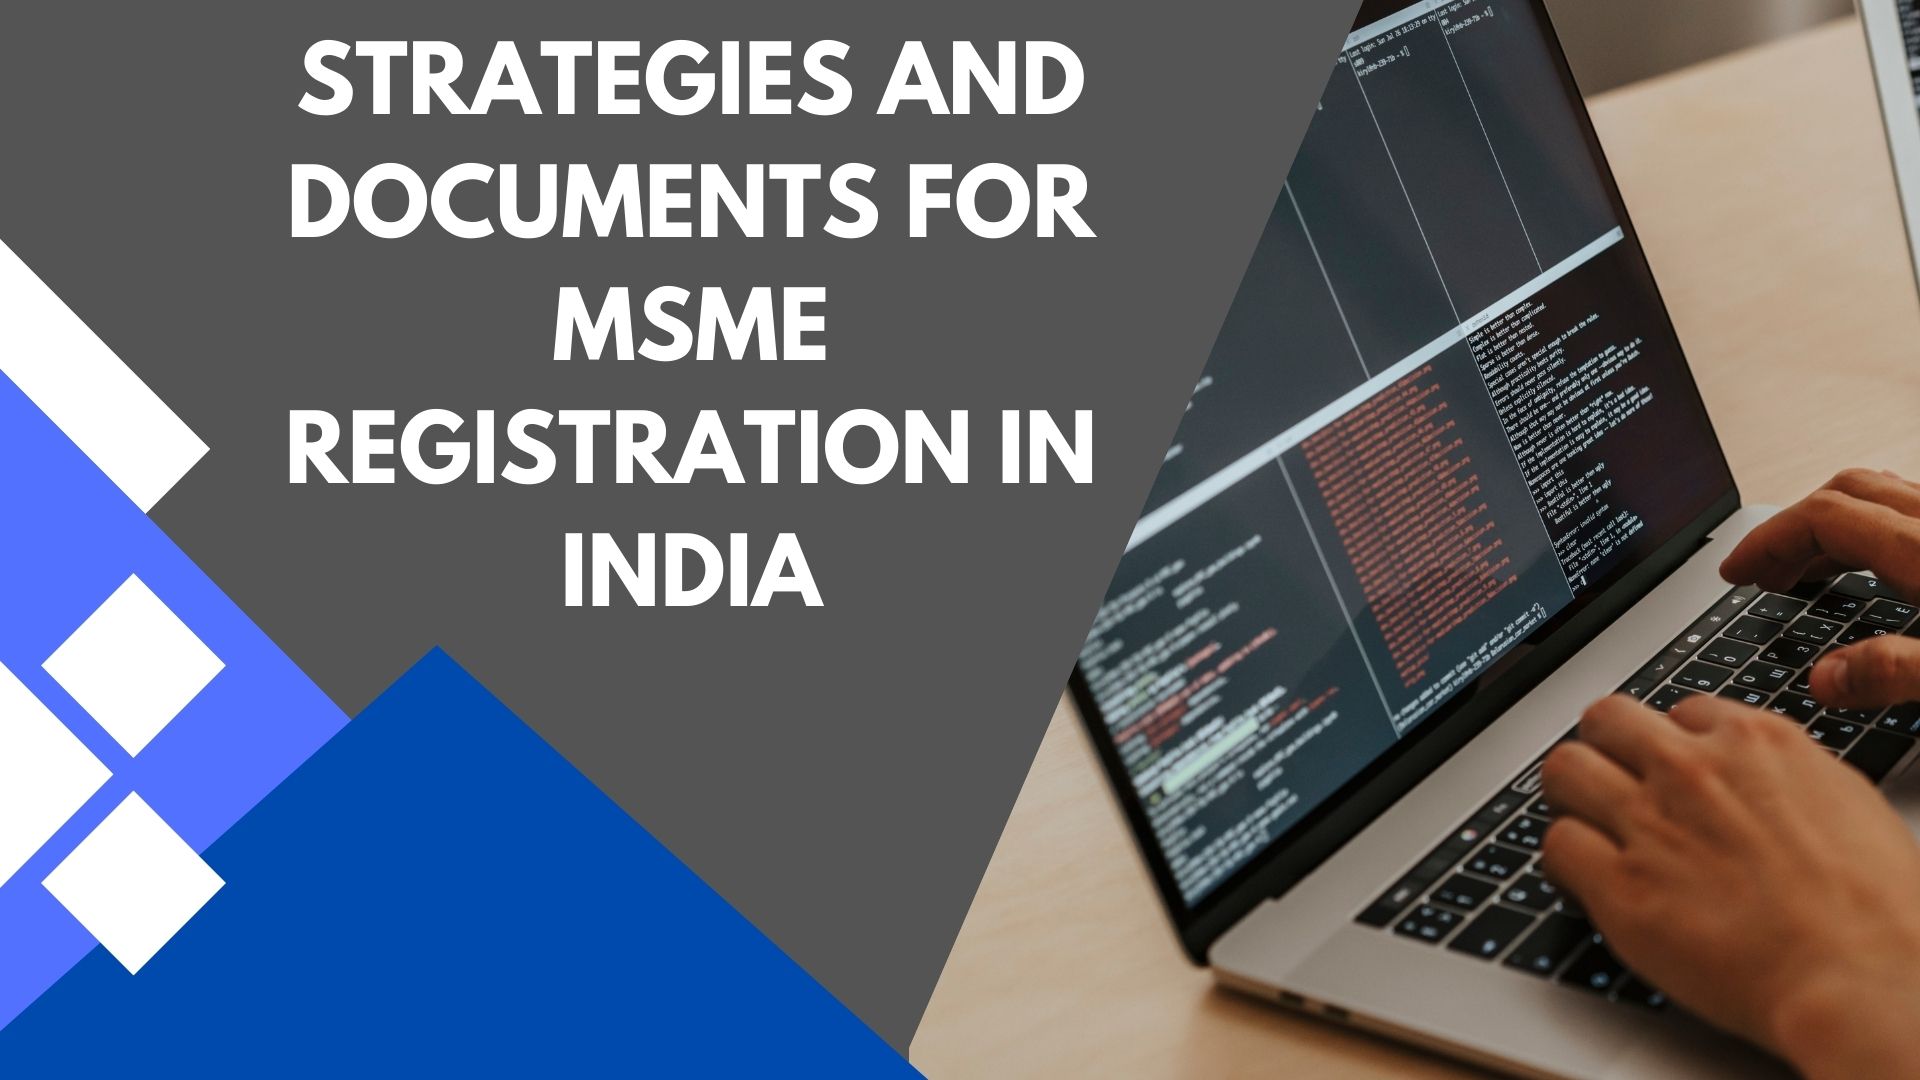 Strategies and Documents for MSME Registration in India